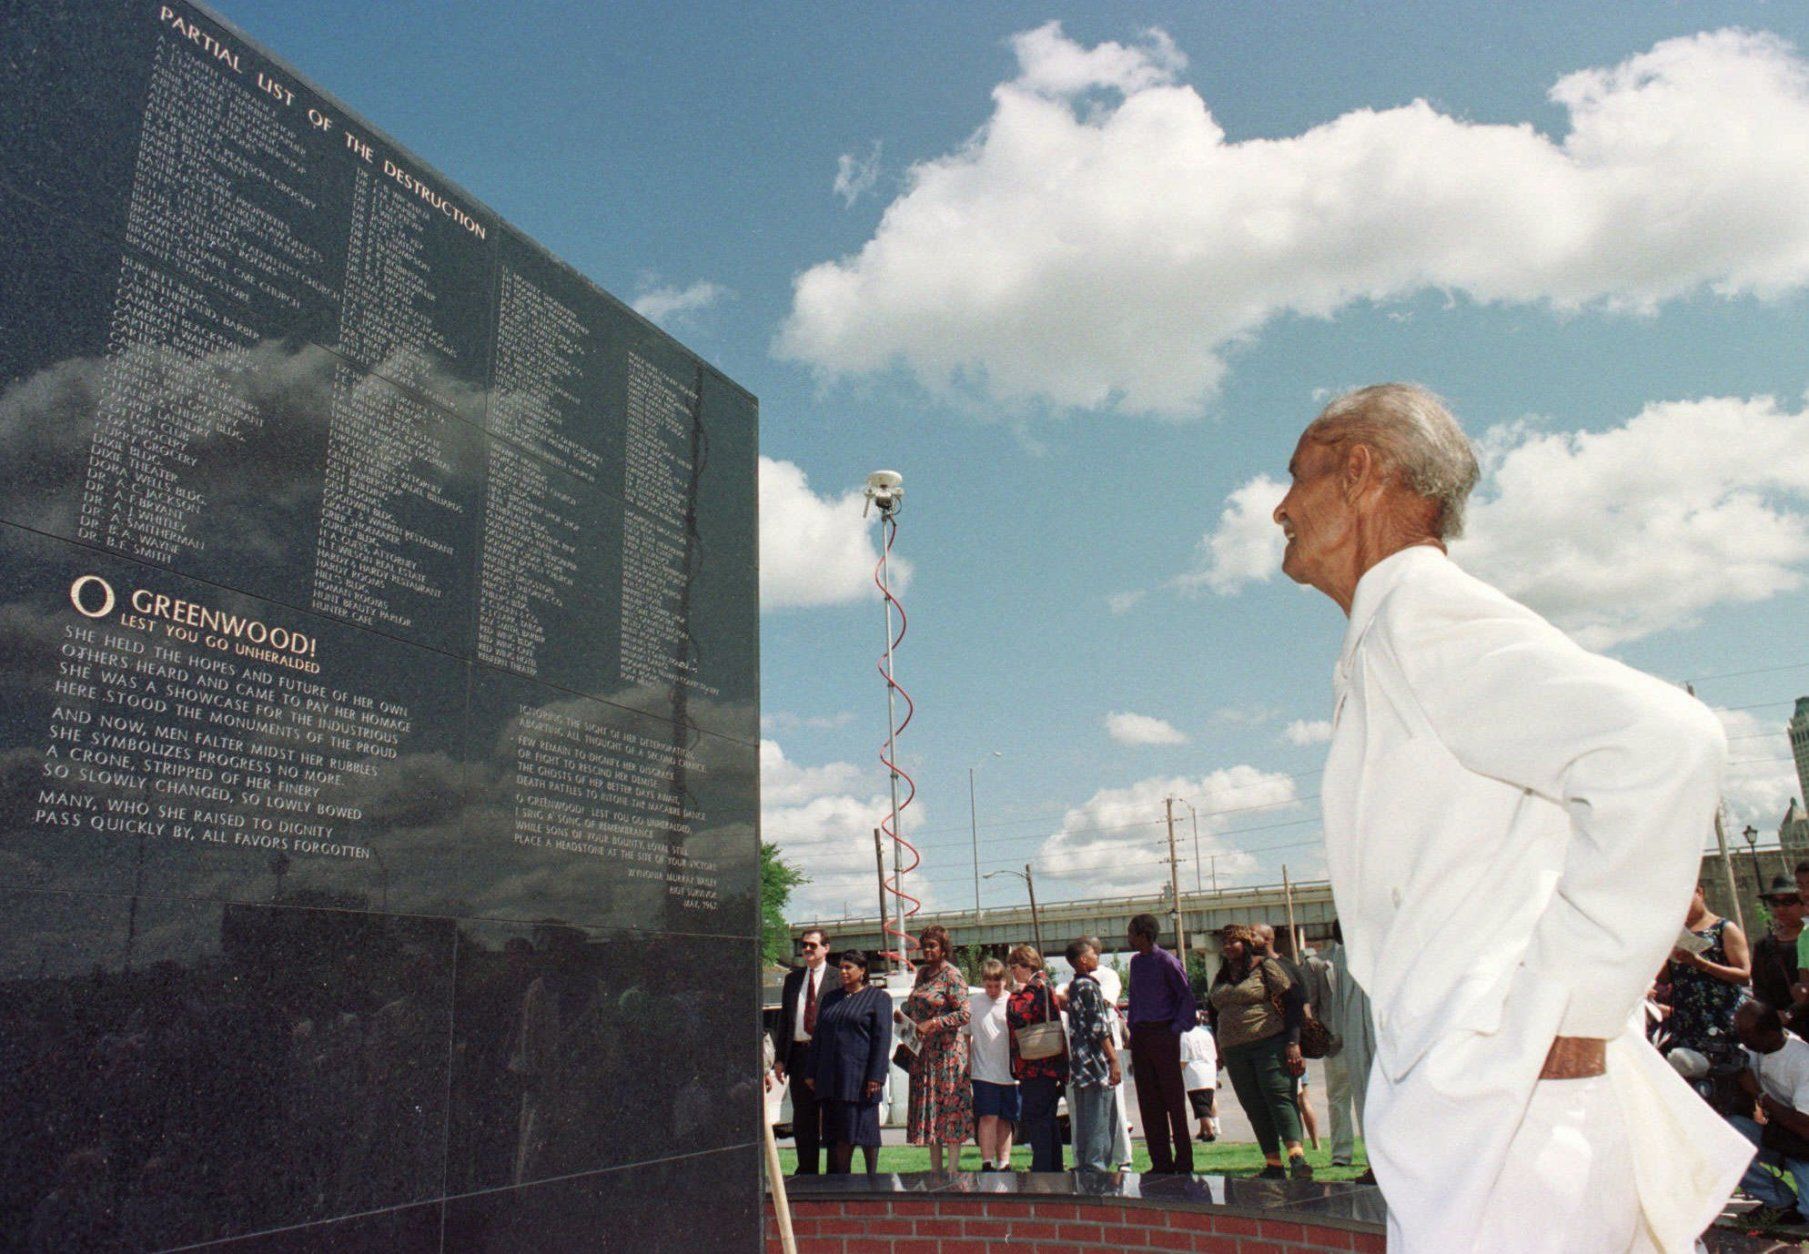 Tulsa race riot survivor George Monroe, now 82 years old, examines the monument dedicated Saturday, June 1, 1996, as part of the 75th anniversary commemoration ceremonies in Tulsa, Okla. Saturday marks the first time the City of Tulsa has officially recognized the events of the riot that took place on this day in 1921. (AP Photo by Michael Wyke)